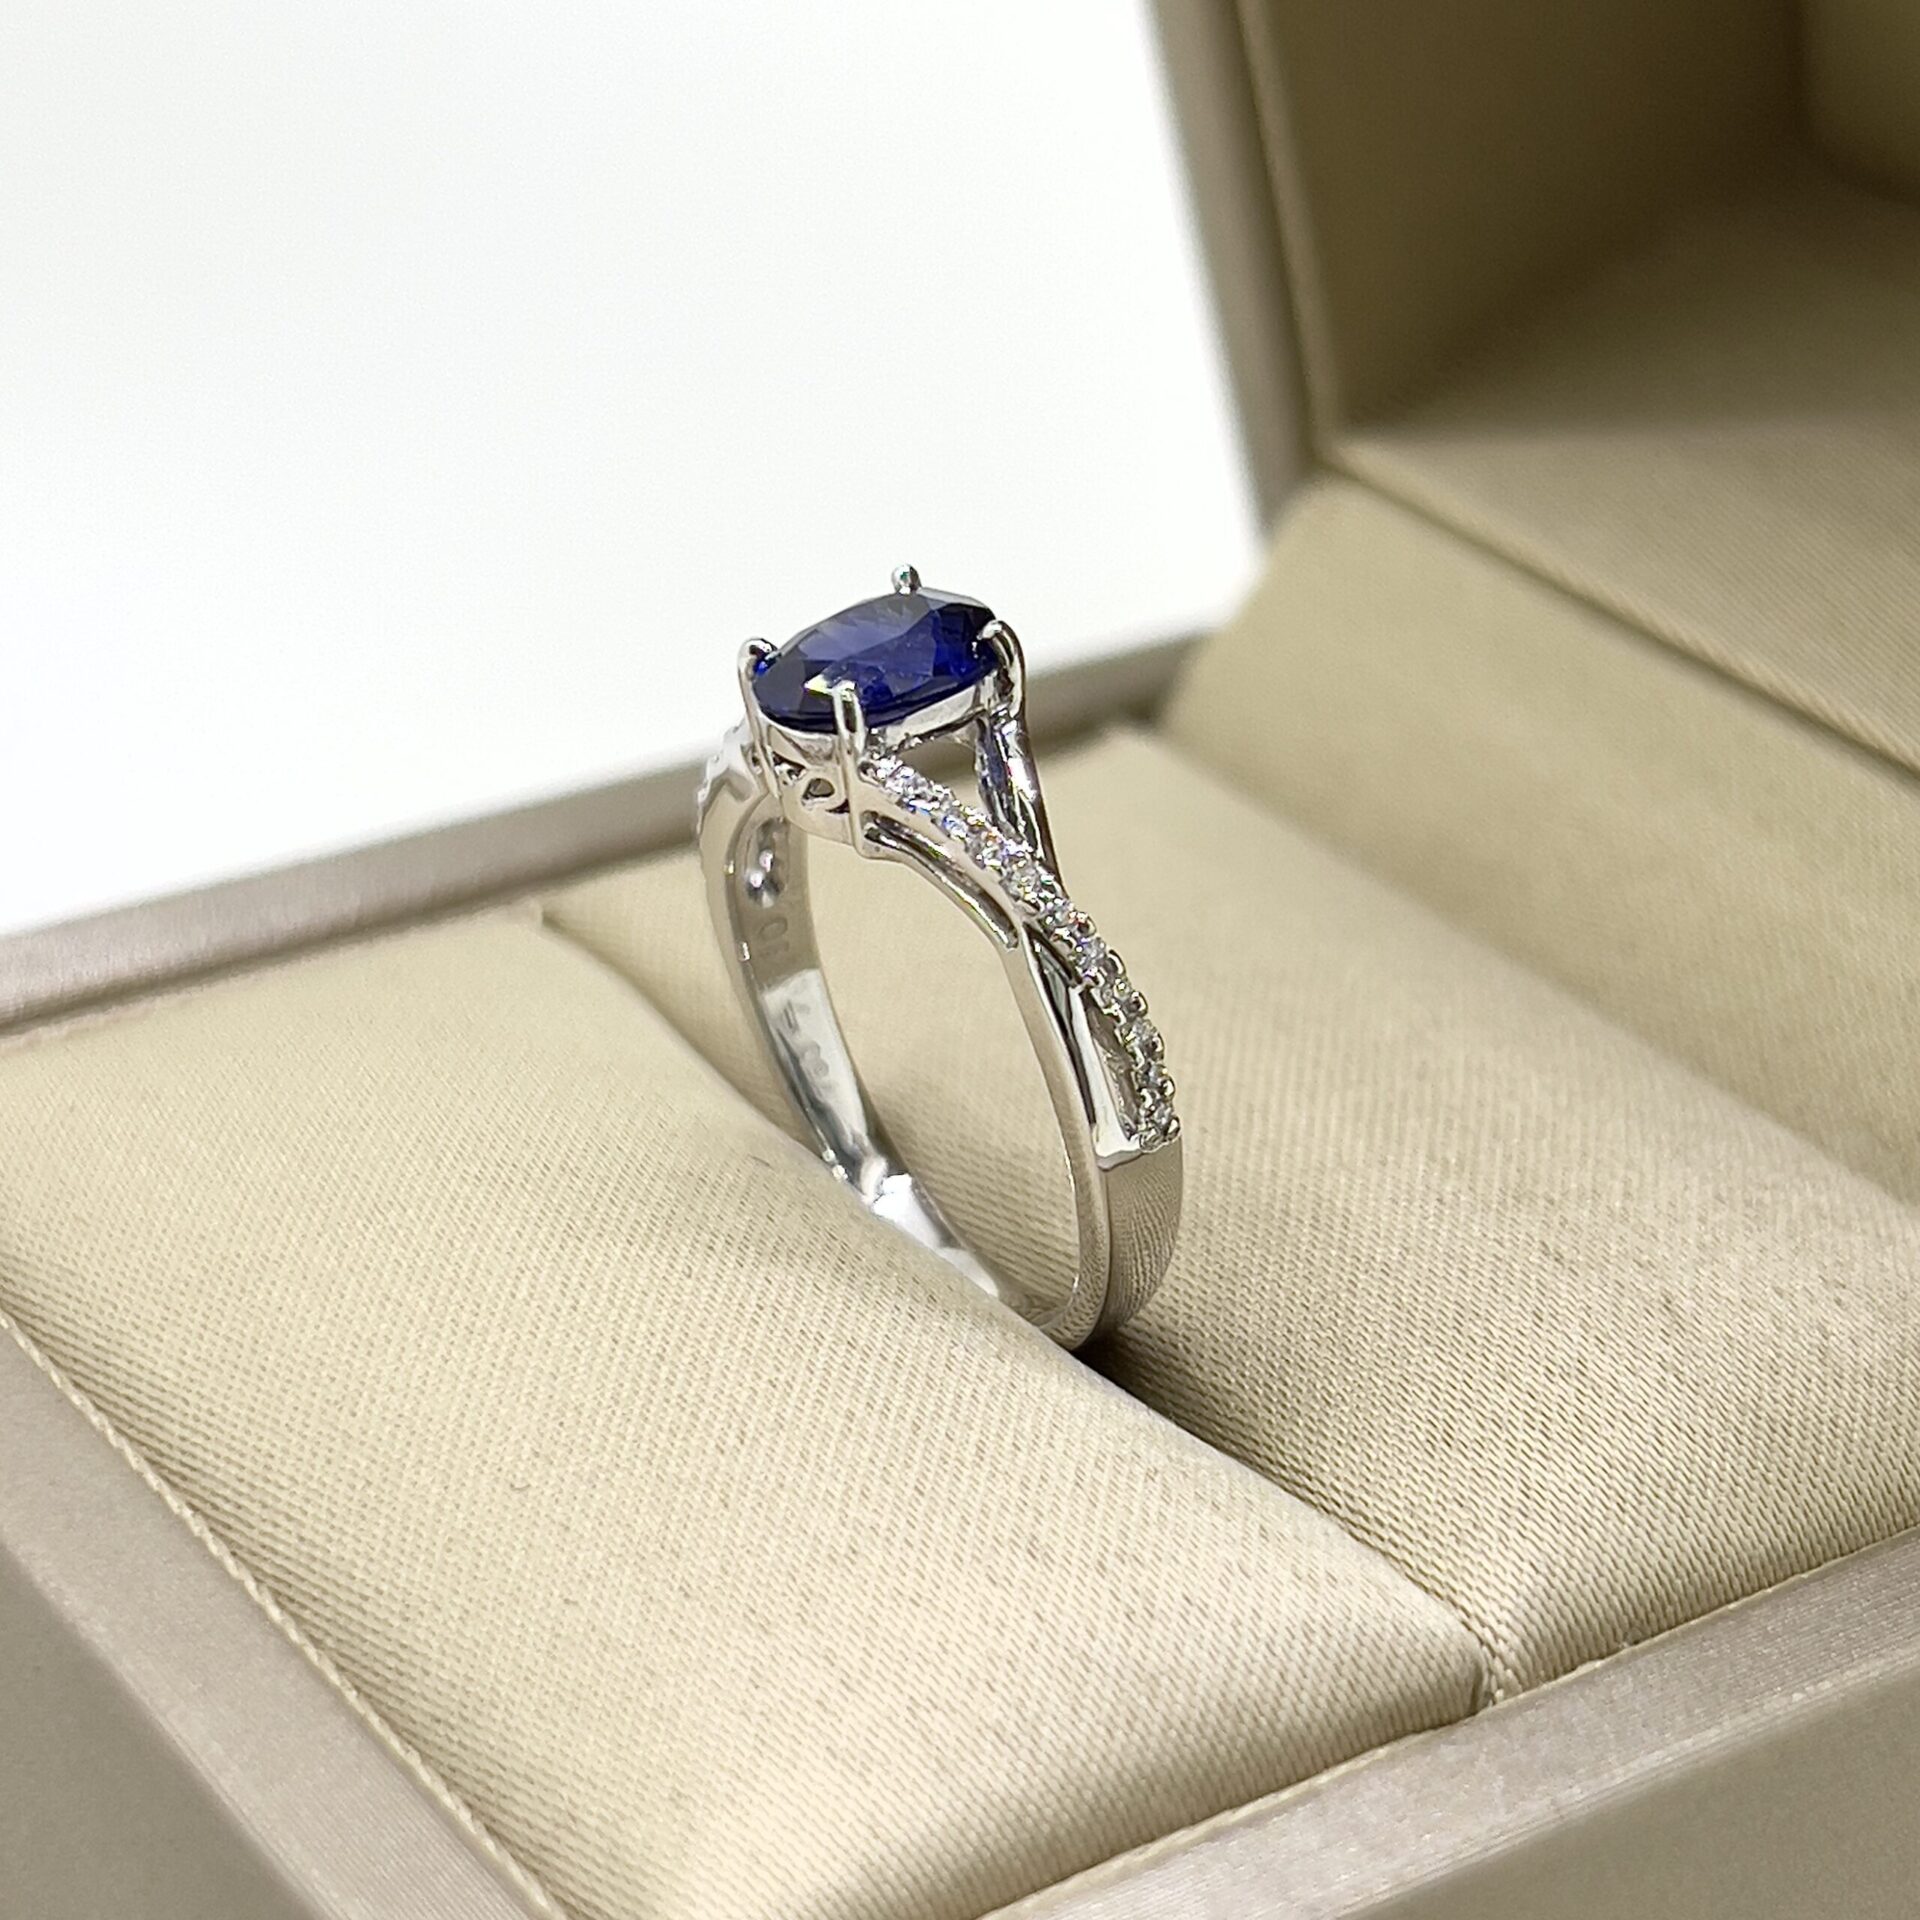 A Buyer's Guide to Blue Diamond Rings